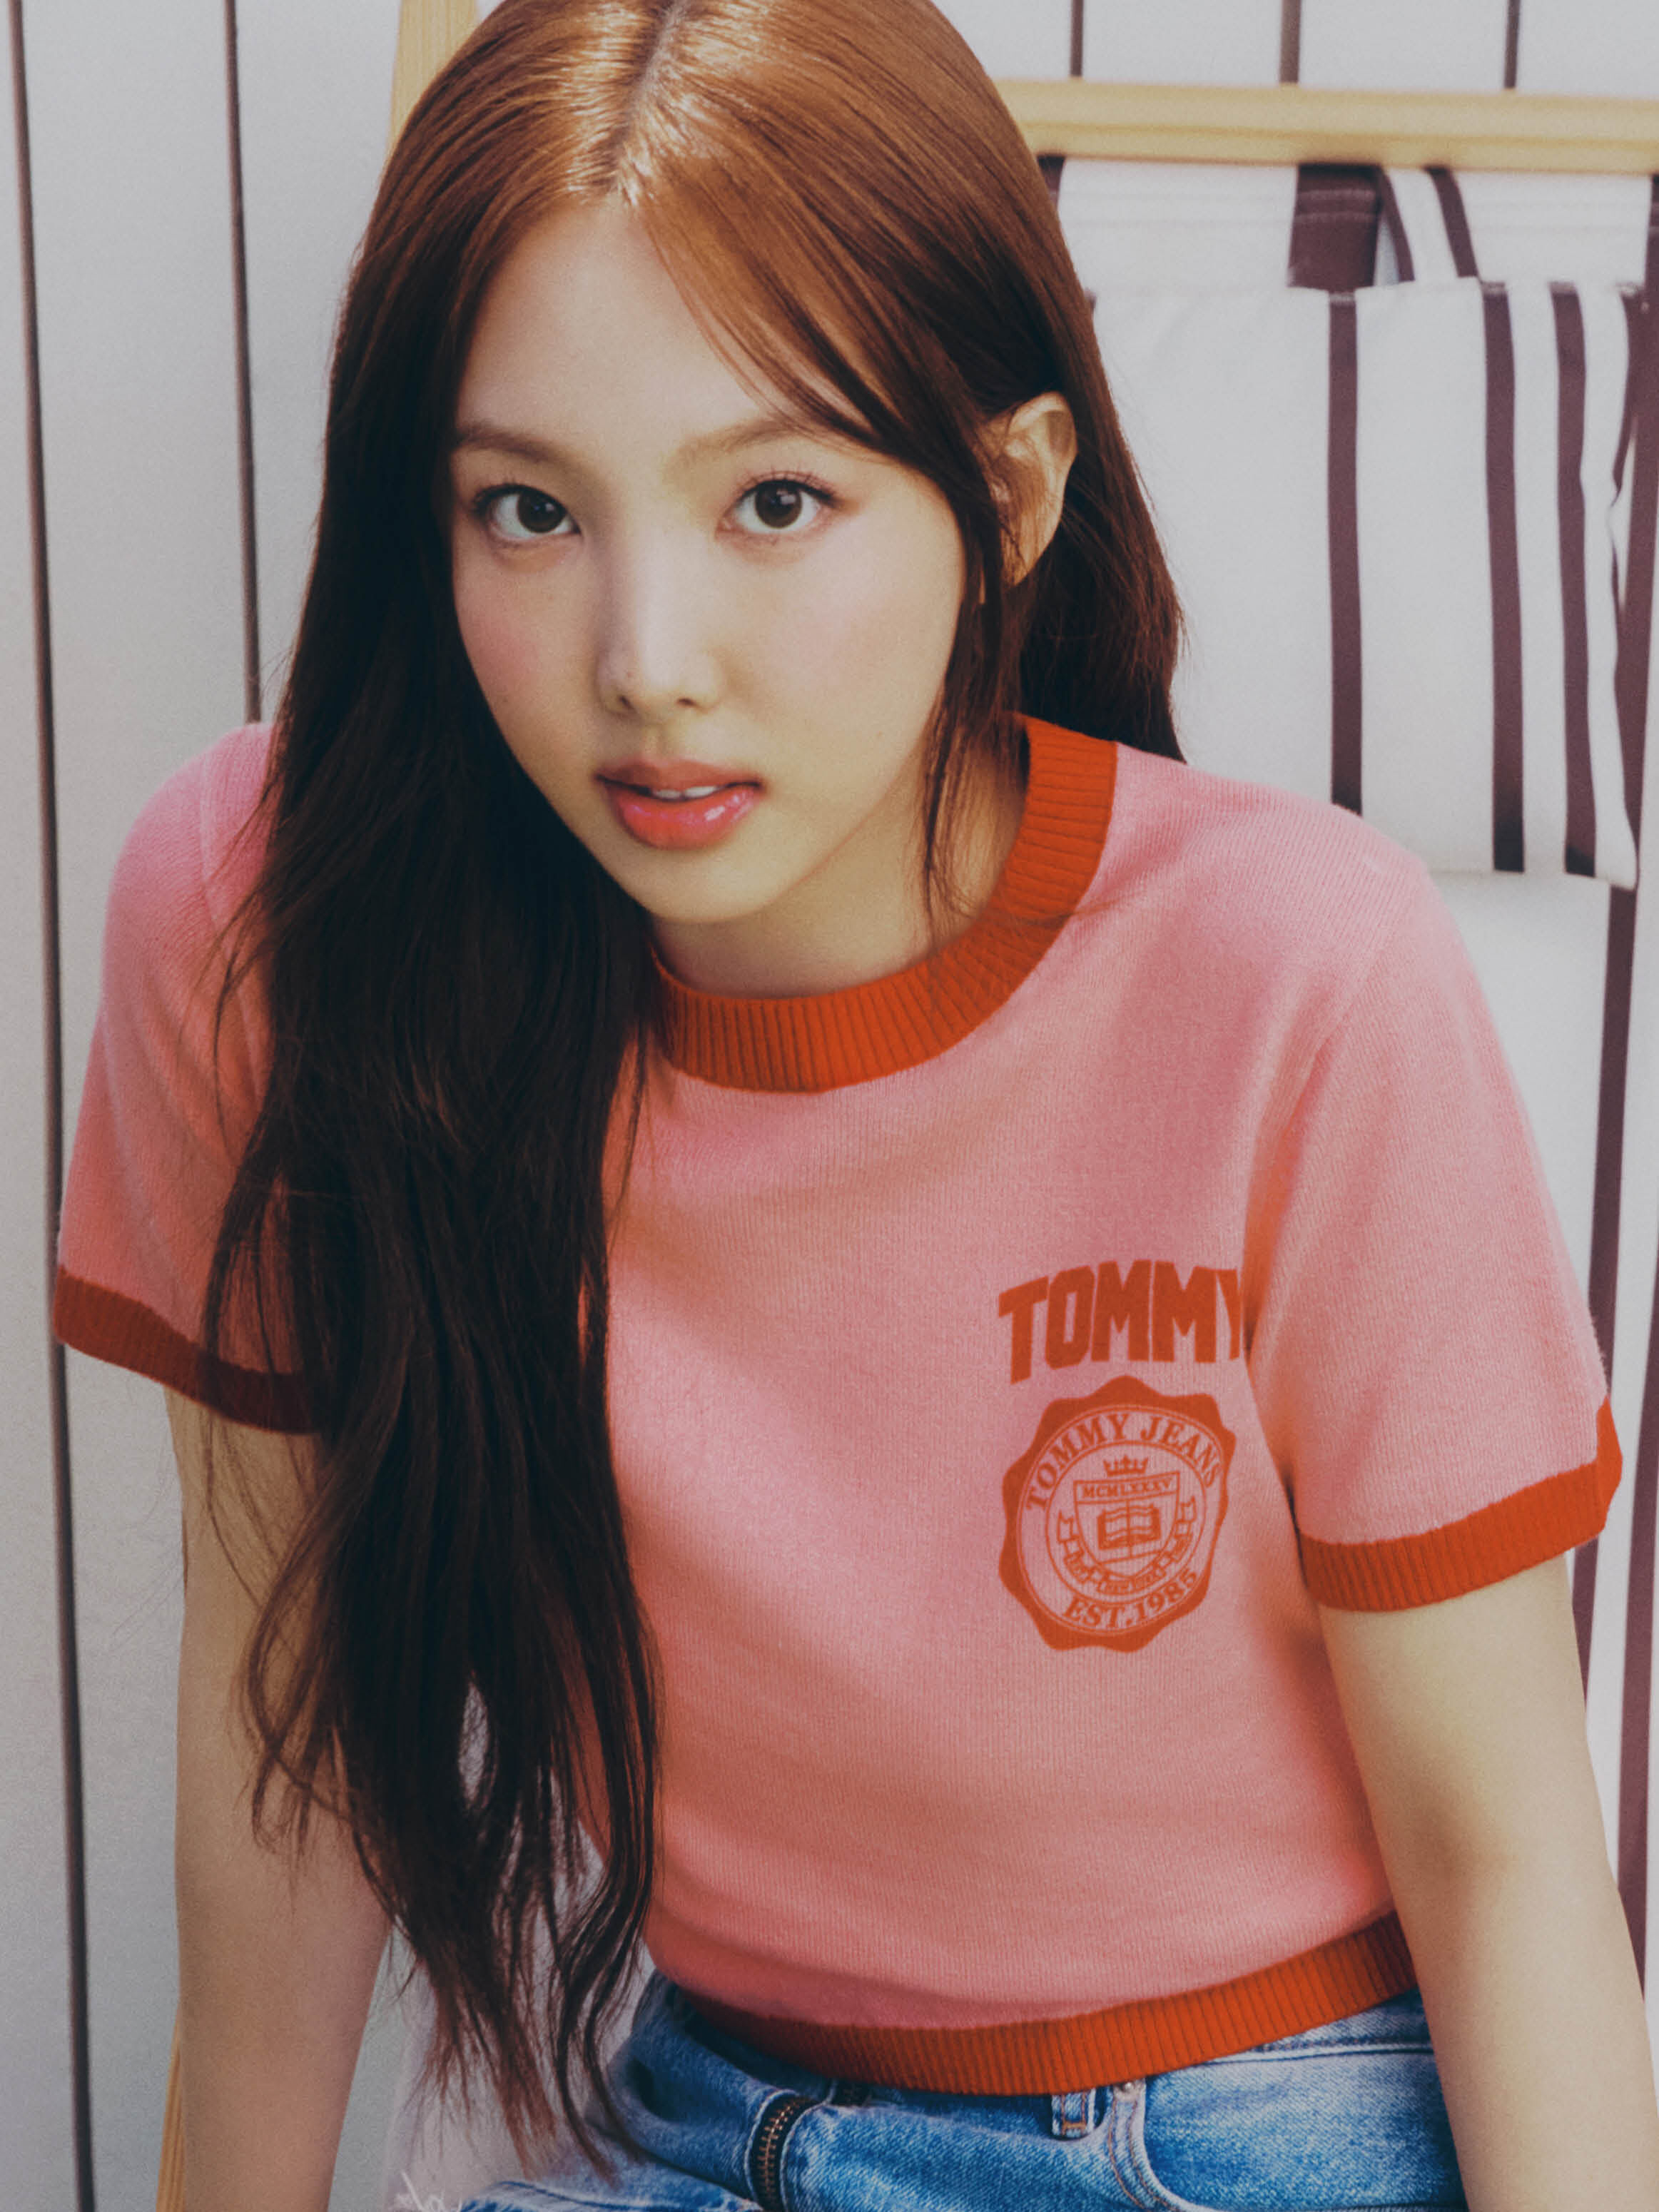 Tommy Jeans x Nayeon featuring Tommy Jeans Tops